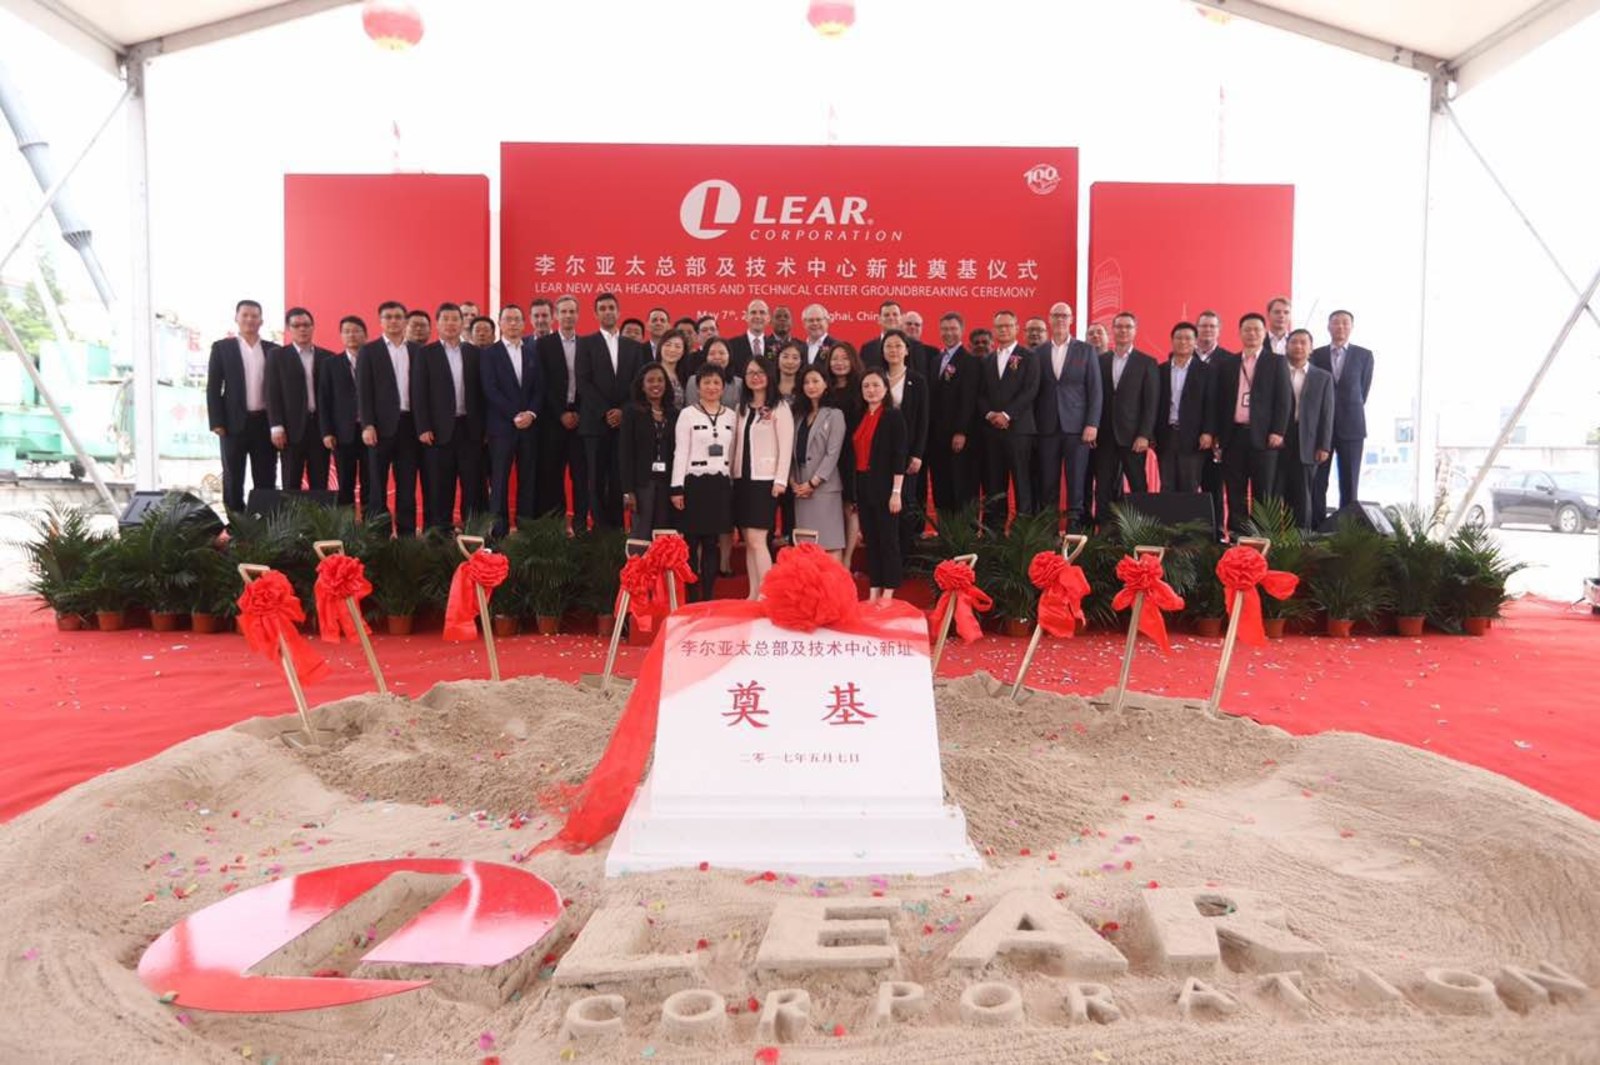 Lear Holds Groundbreaking Ceremony for Shanghai Headquarters